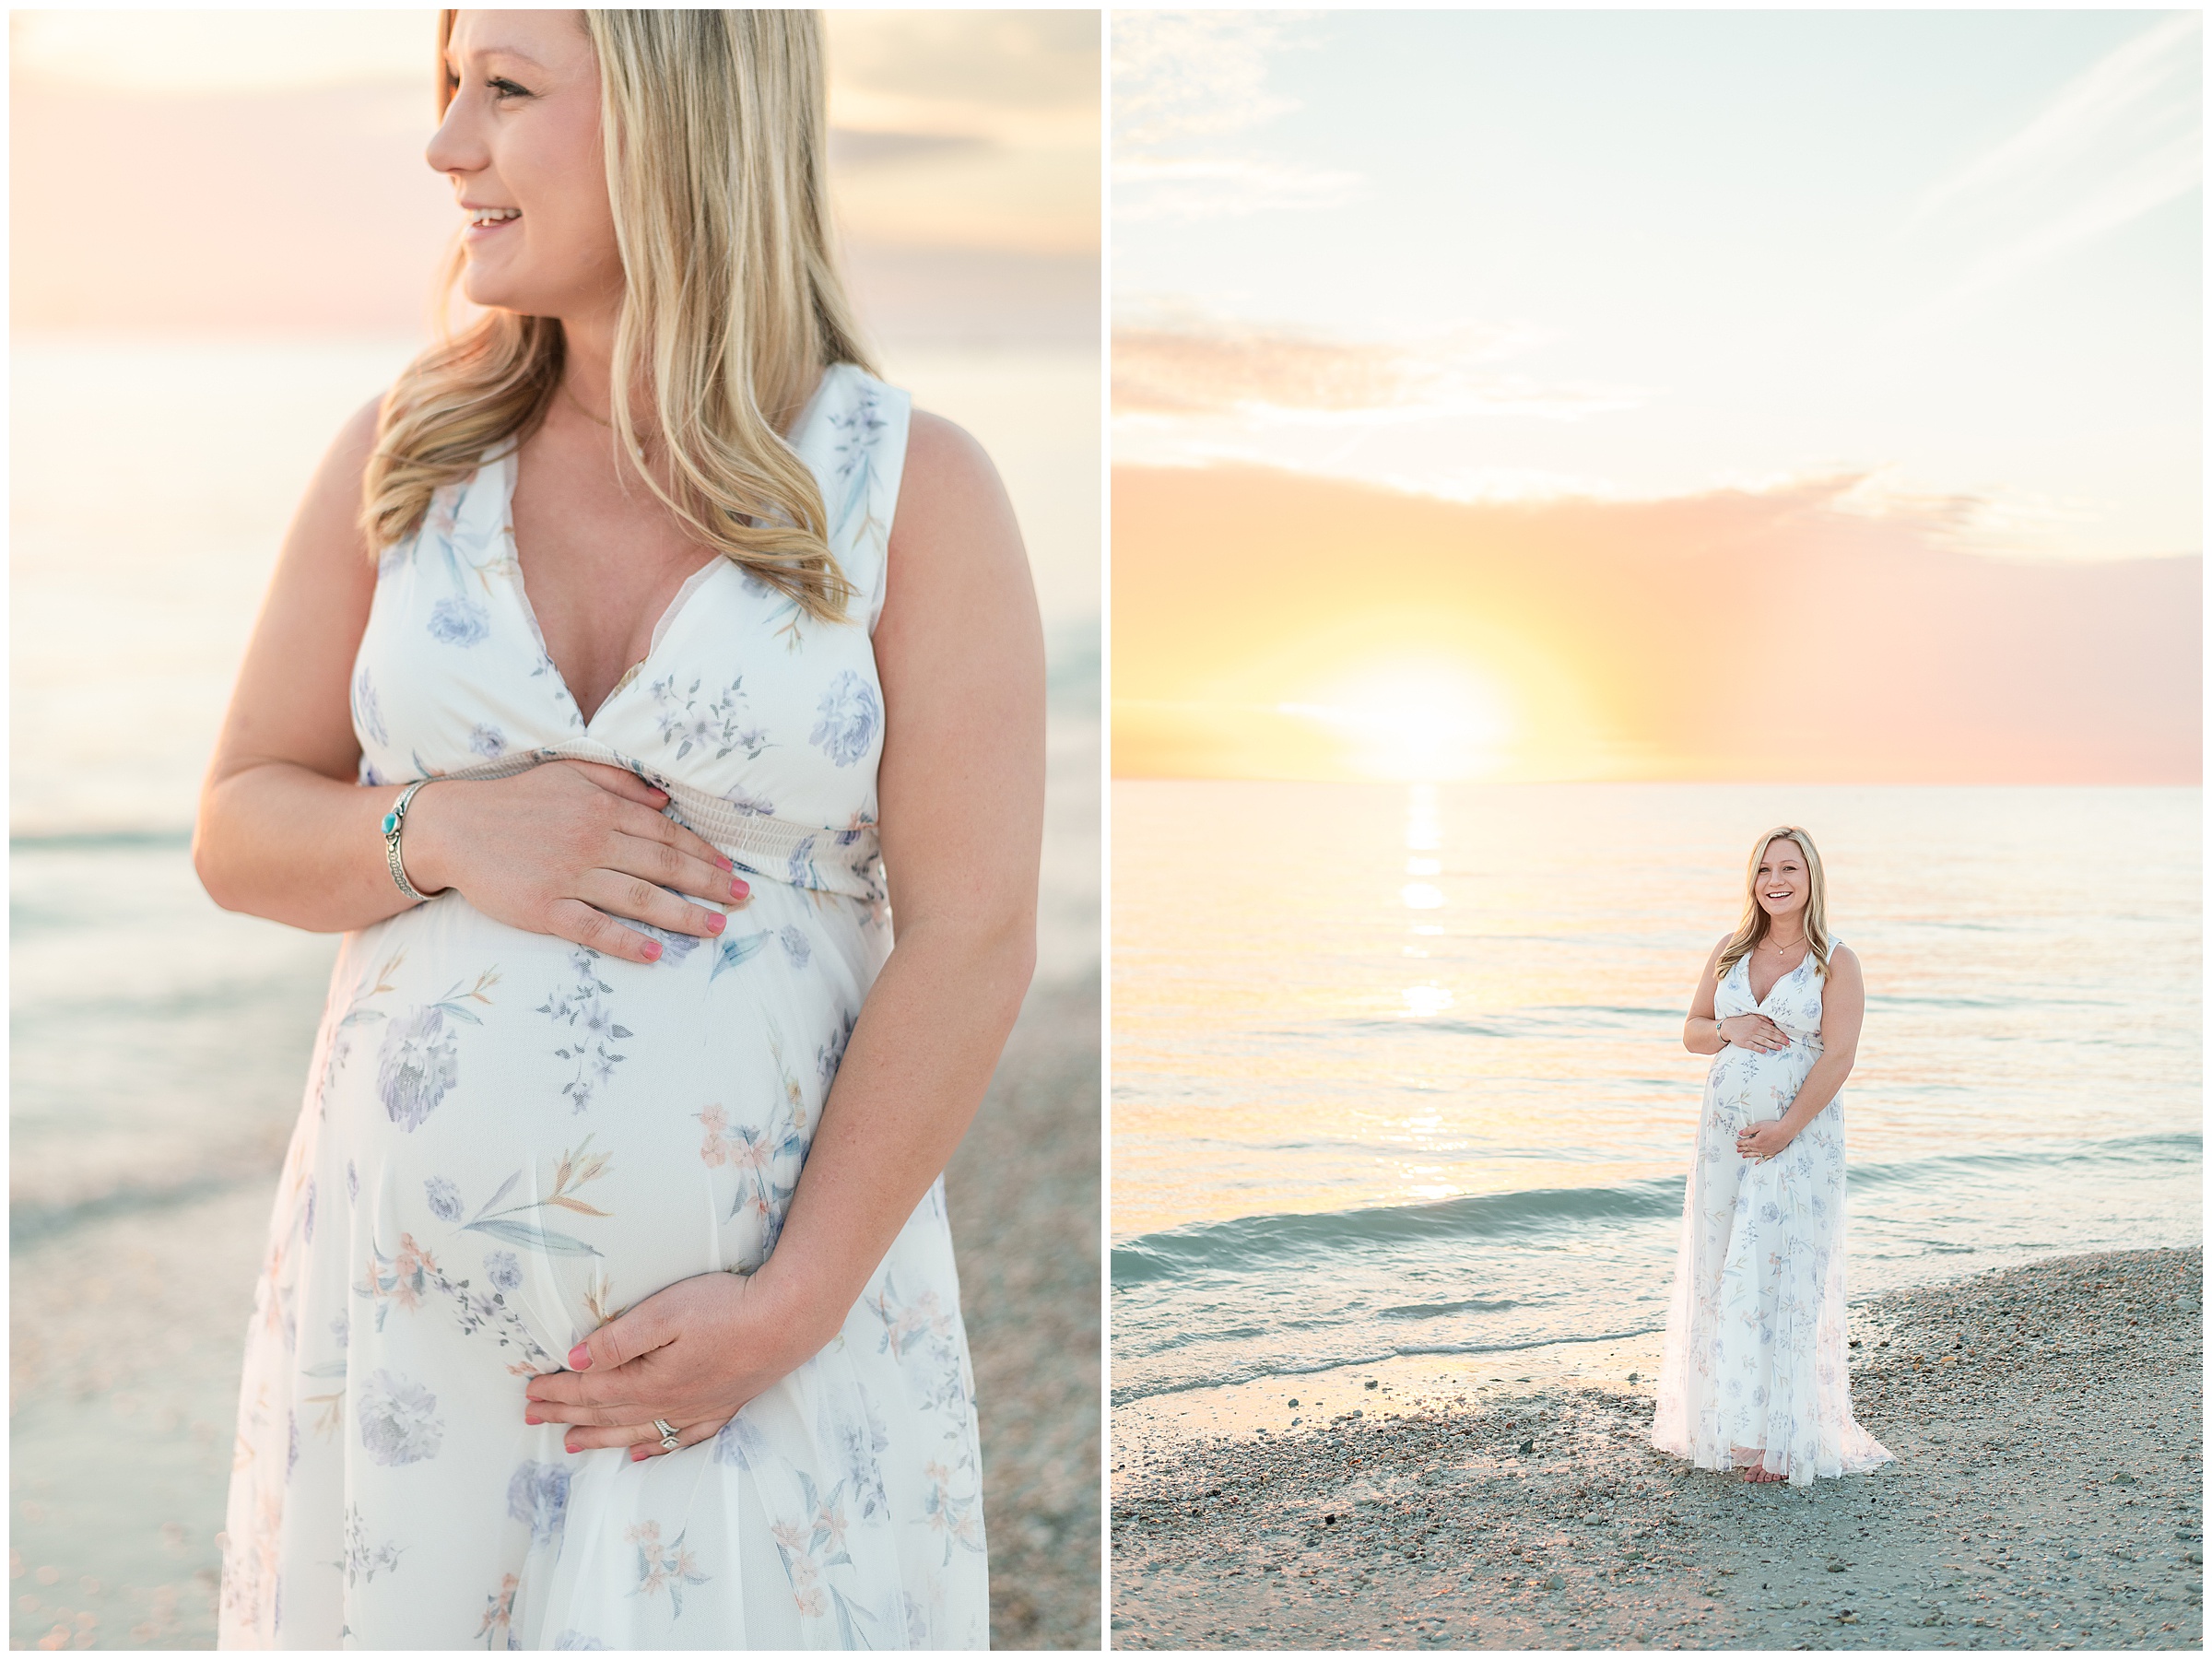 Brooke holding her belly on the beach for her Maternity photos at Honeymoon Island State Park in Florida. 